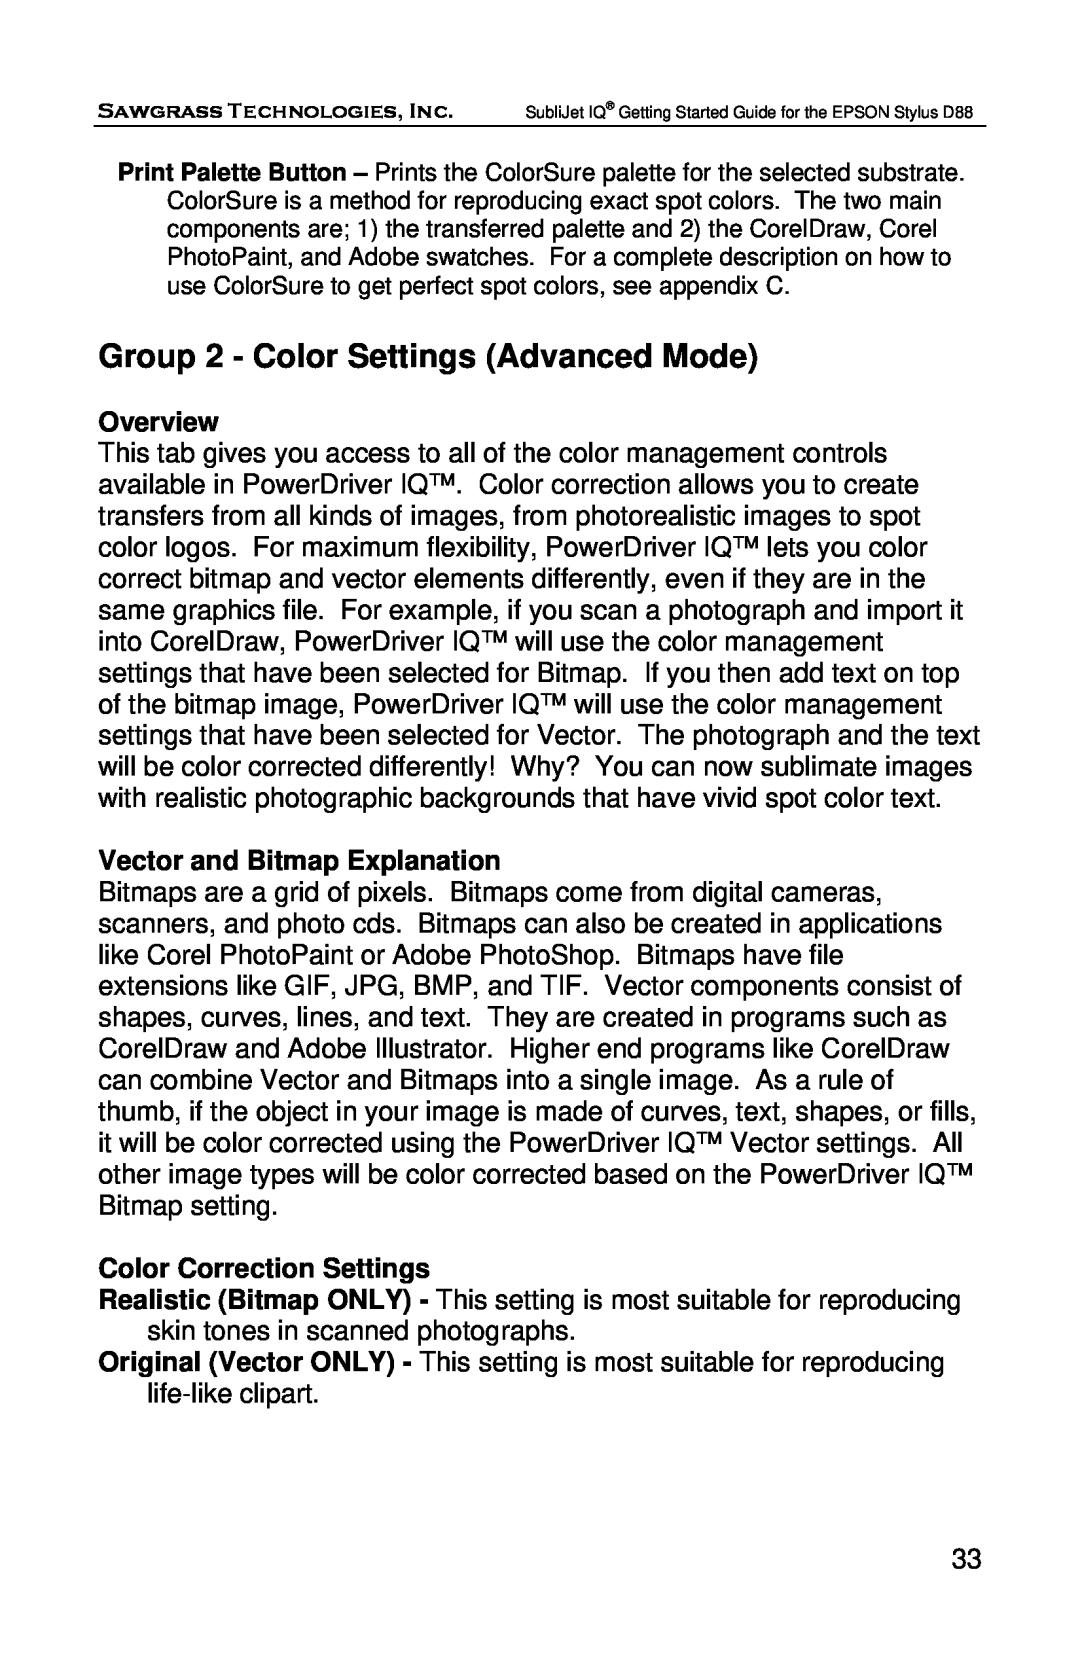 Epson D88 manual Group 2 - Color Settings Advanced Mode, Overview, Vector and Bitmap Explanation, Color Correction Settings 